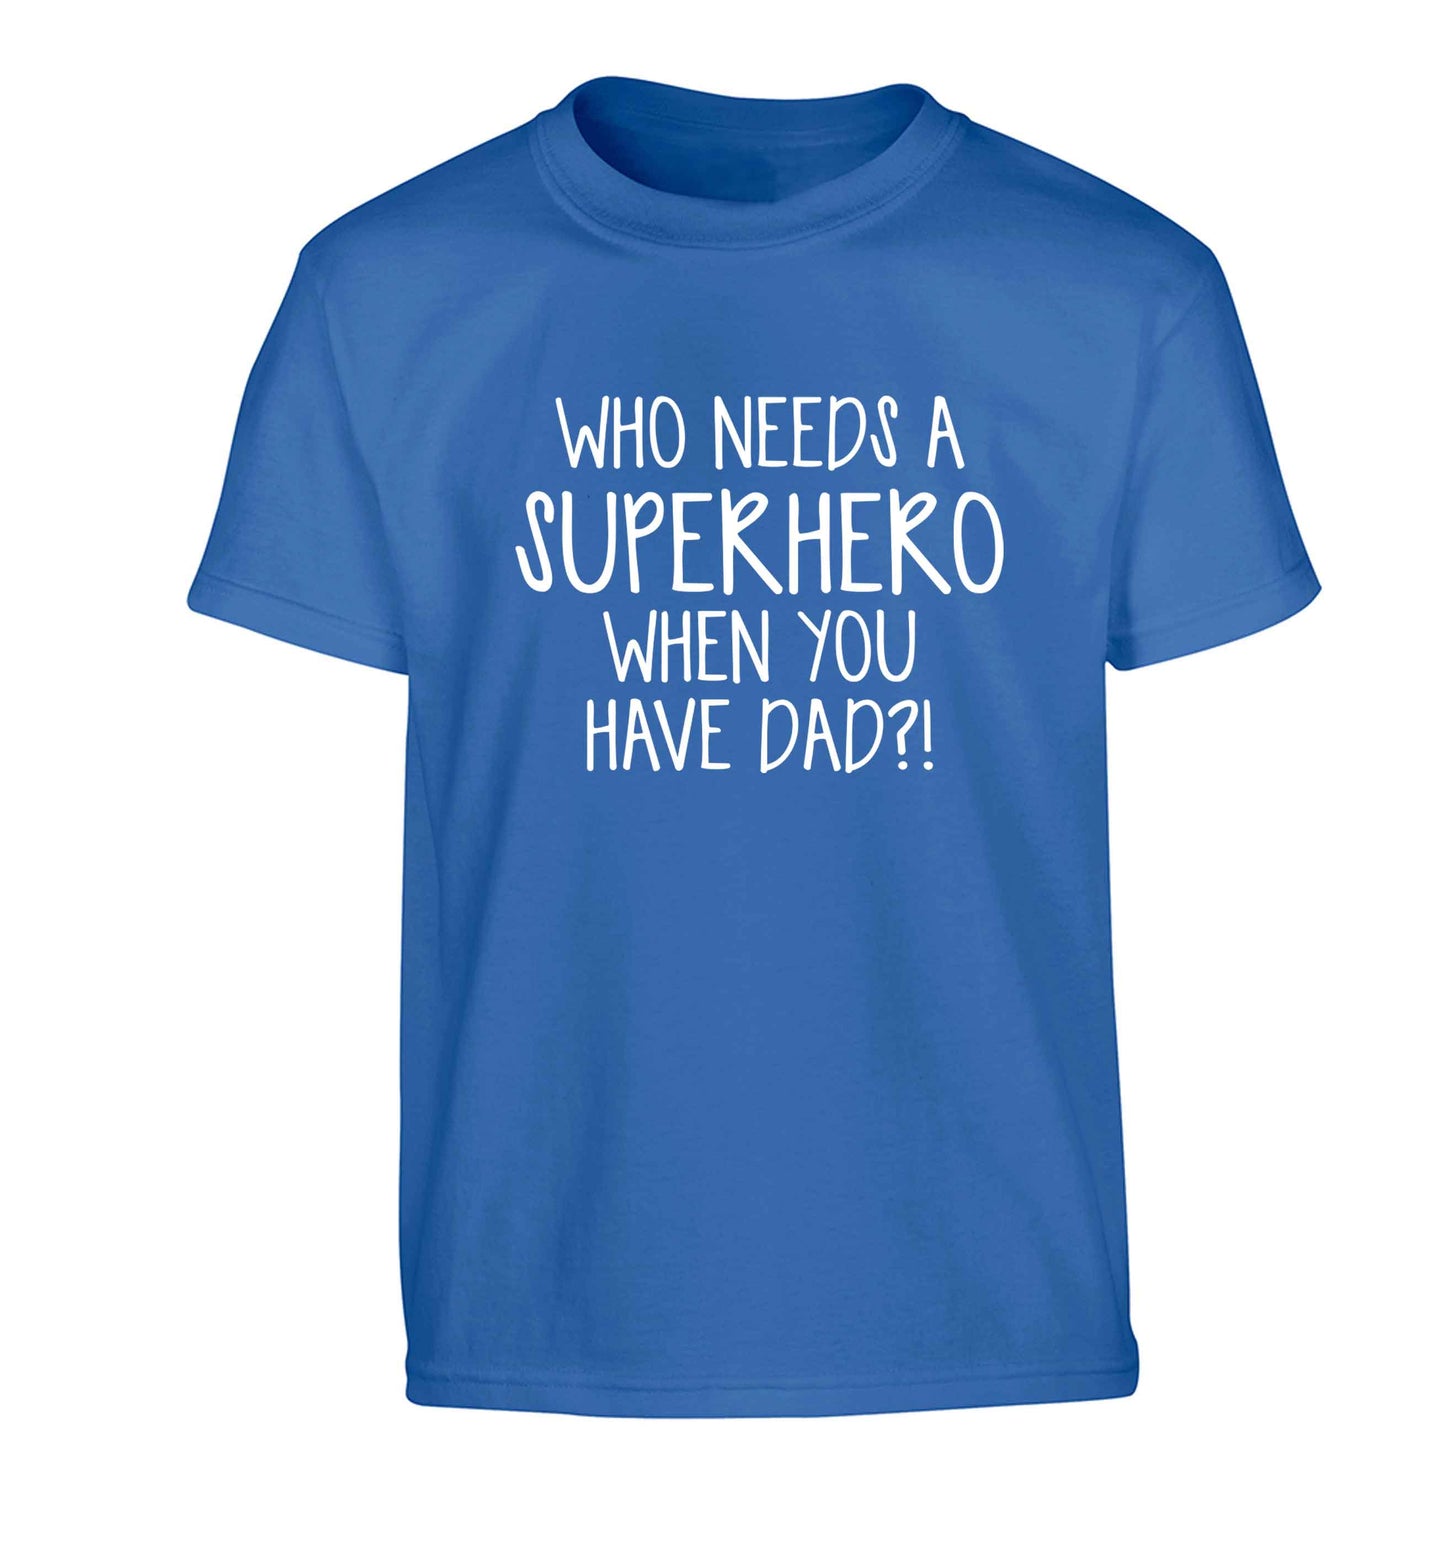 Who needs a superhero when you have dad! Children's blue Tshirt 12-13 Years